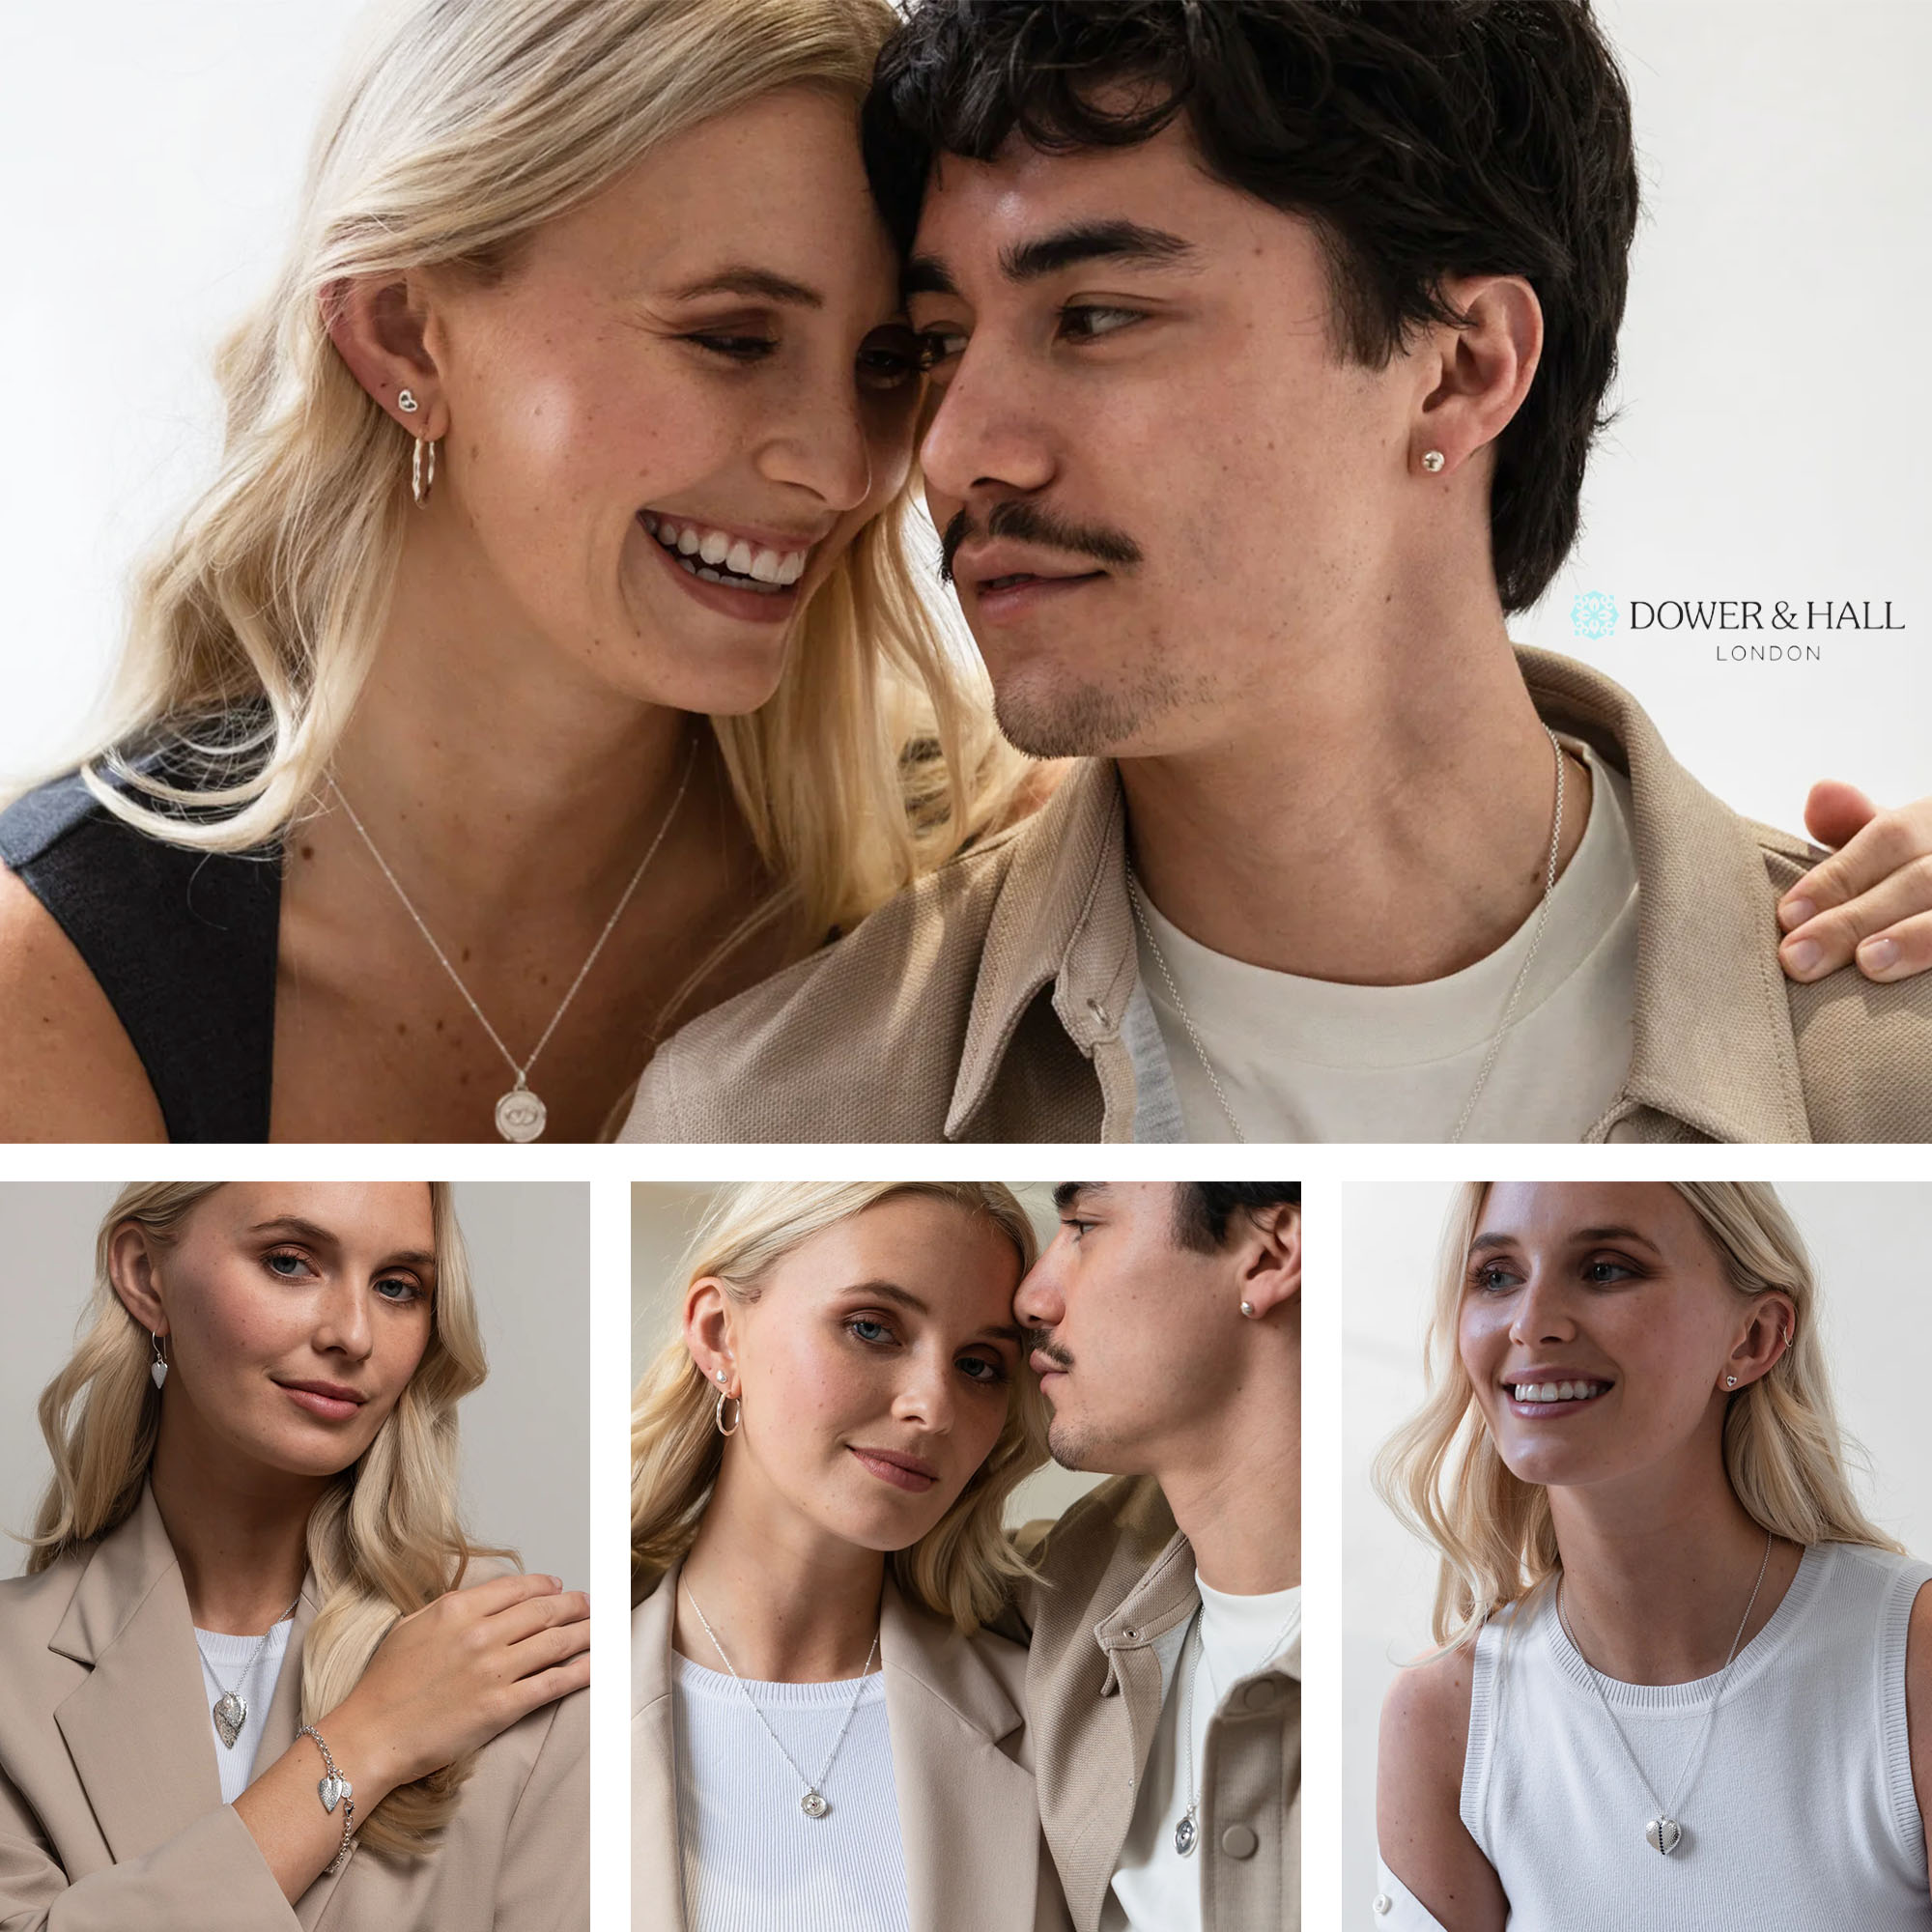 Image of models Elvira and Edward from Sandra Reynolds Agency showcasing jewellery by Dower & Hall